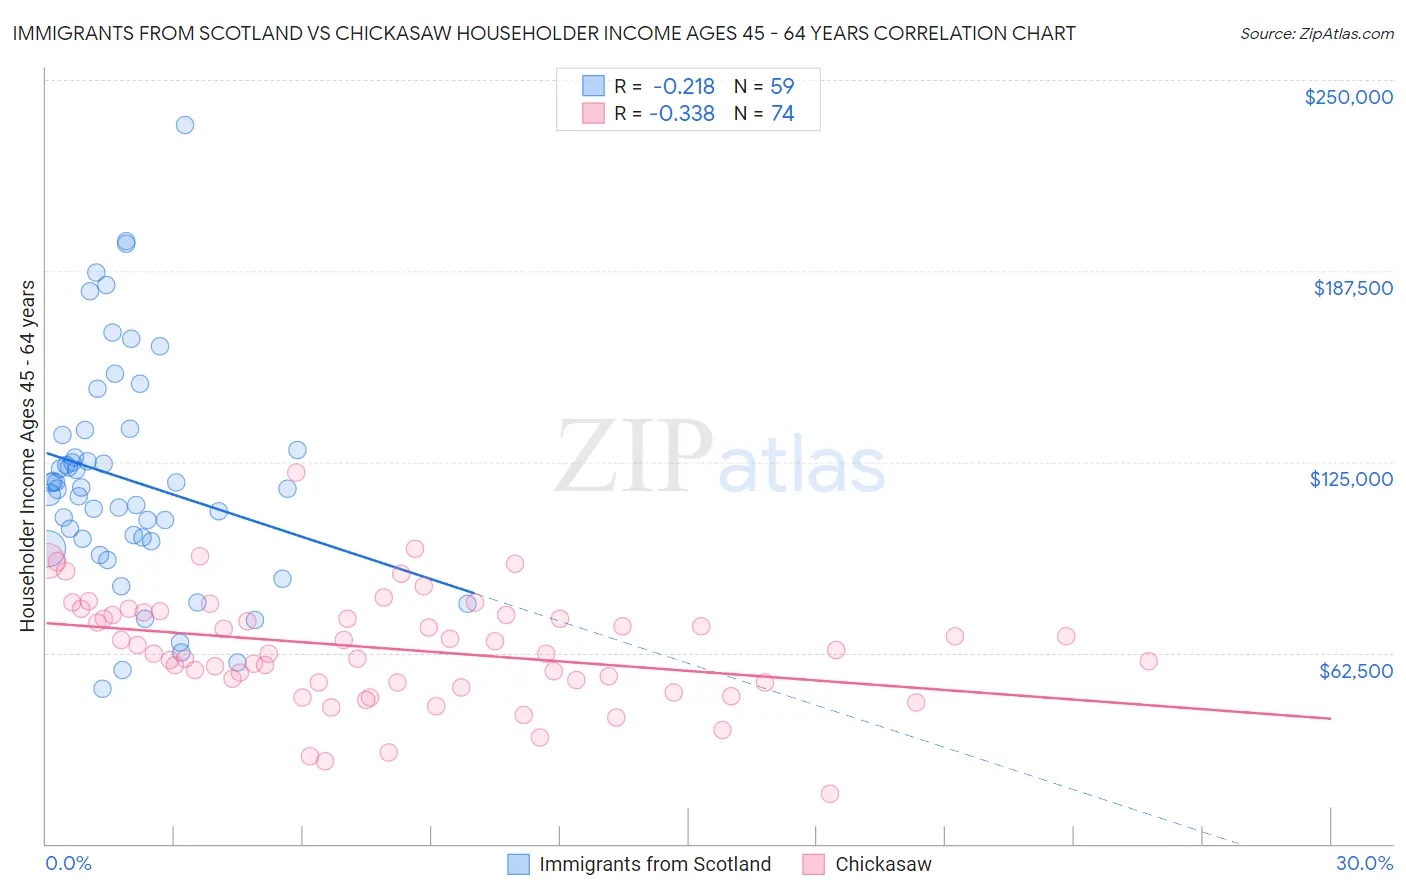 Immigrants from Scotland vs Chickasaw Householder Income Ages 45 - 64 years